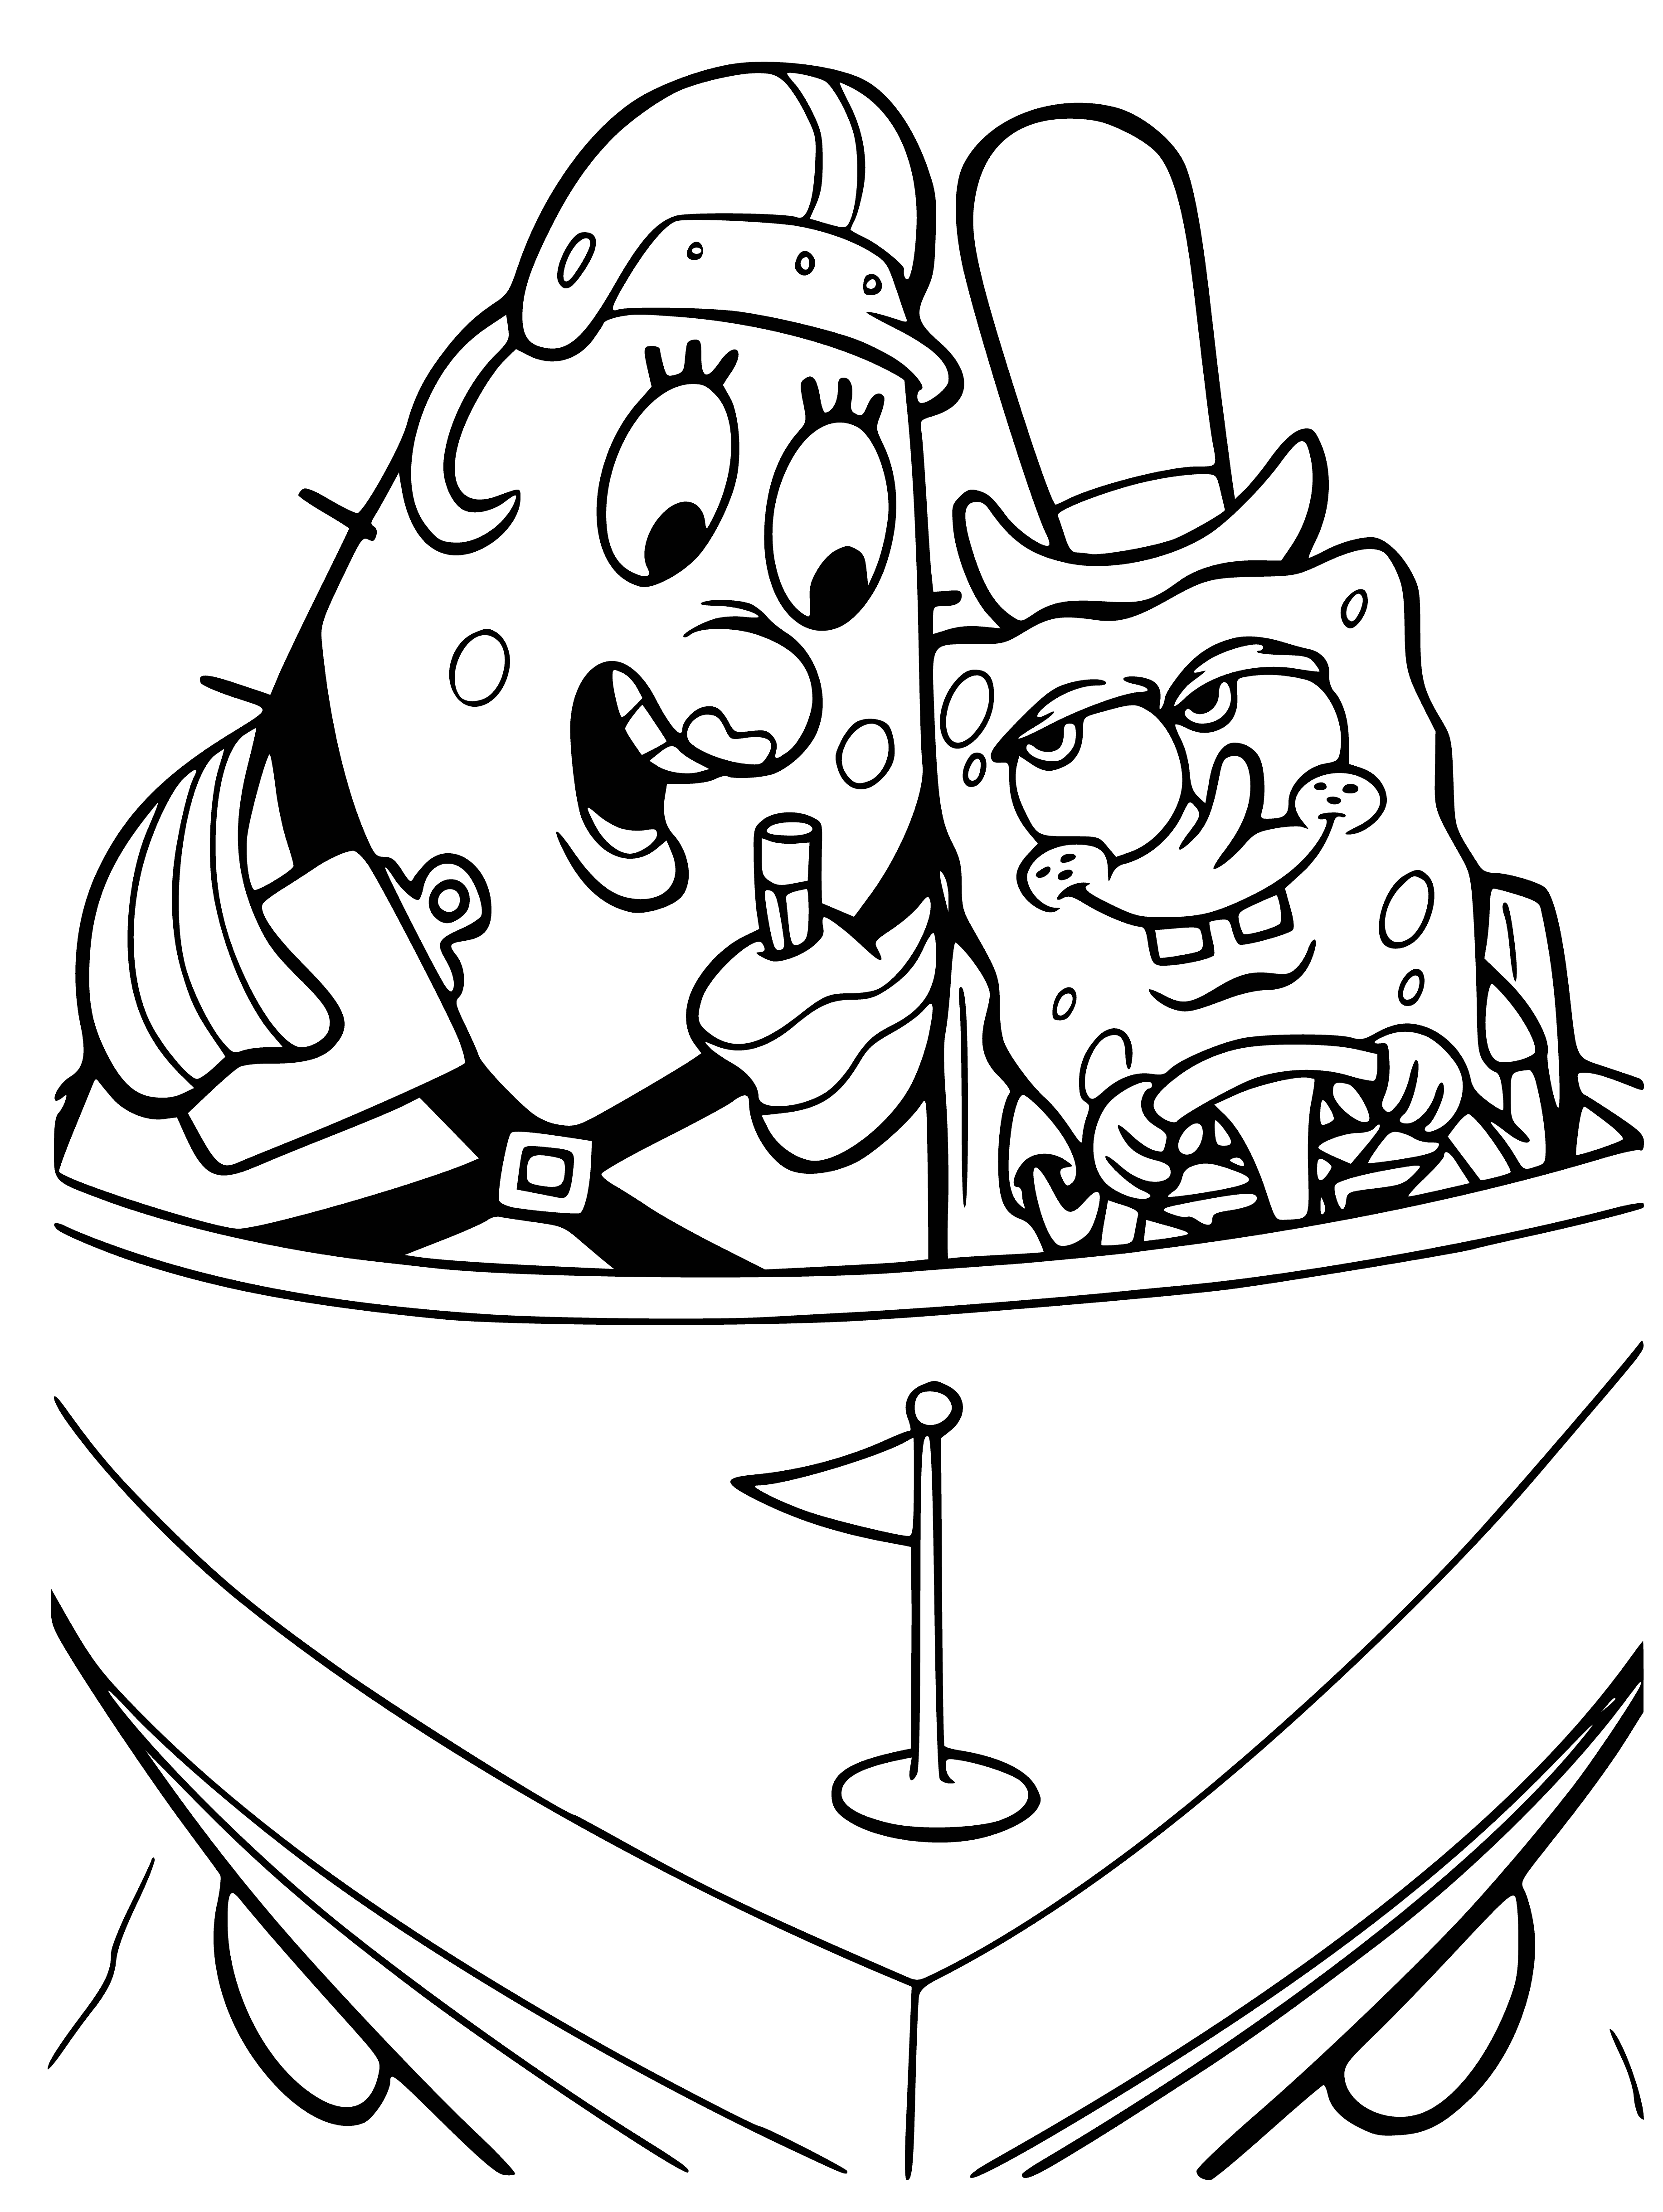 coloring page: Spongebob, Patrick & Sandy live in Bikini Bottom - a town at the bottom of the ocean - & are best friends! #bgc #bikinibottom